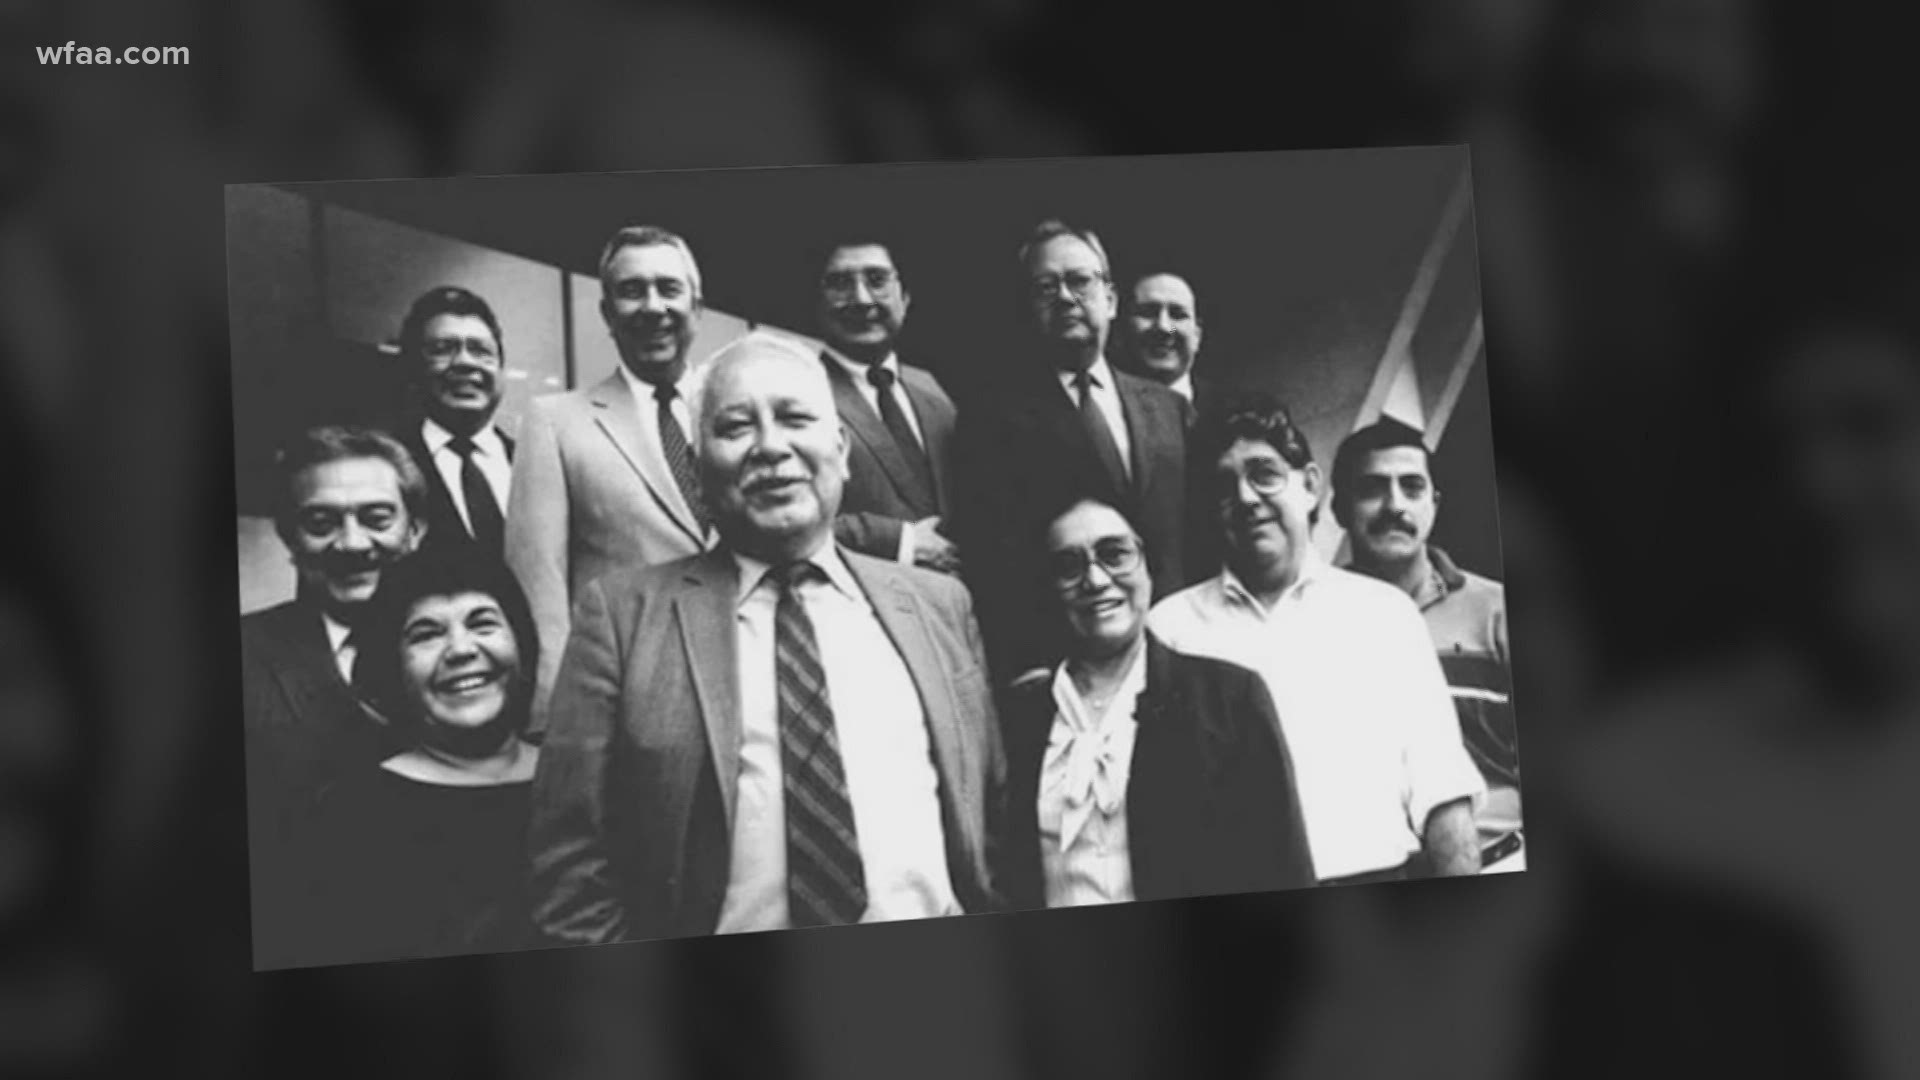 The Dallas Mexican America Historical League has been the record keeper of what used to be the old neighborhoods of Dallas where Latinos first immigrated to.